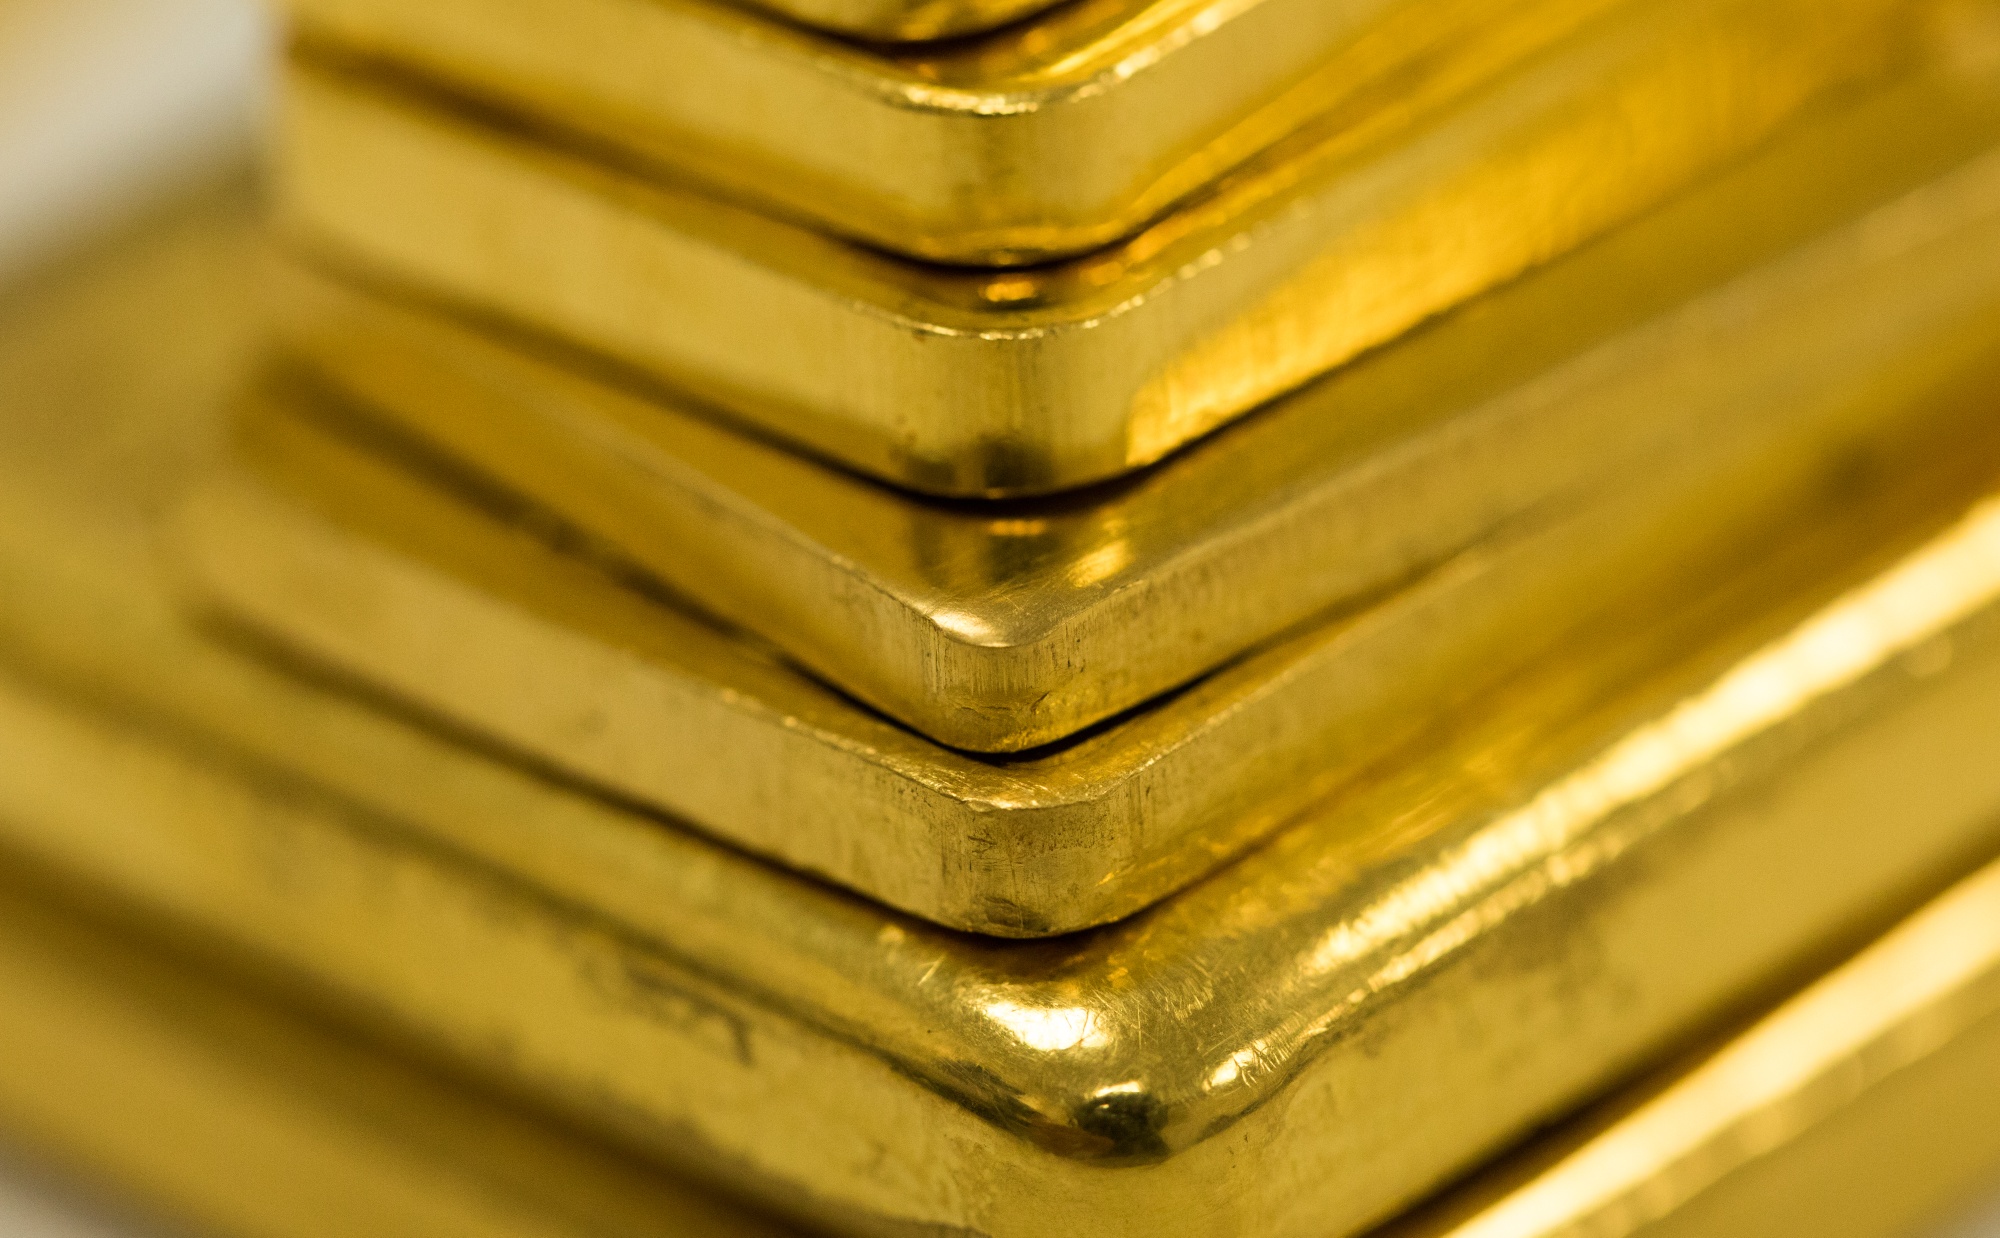 Zimbabwe's new gold-backed digital currency: All you need to know